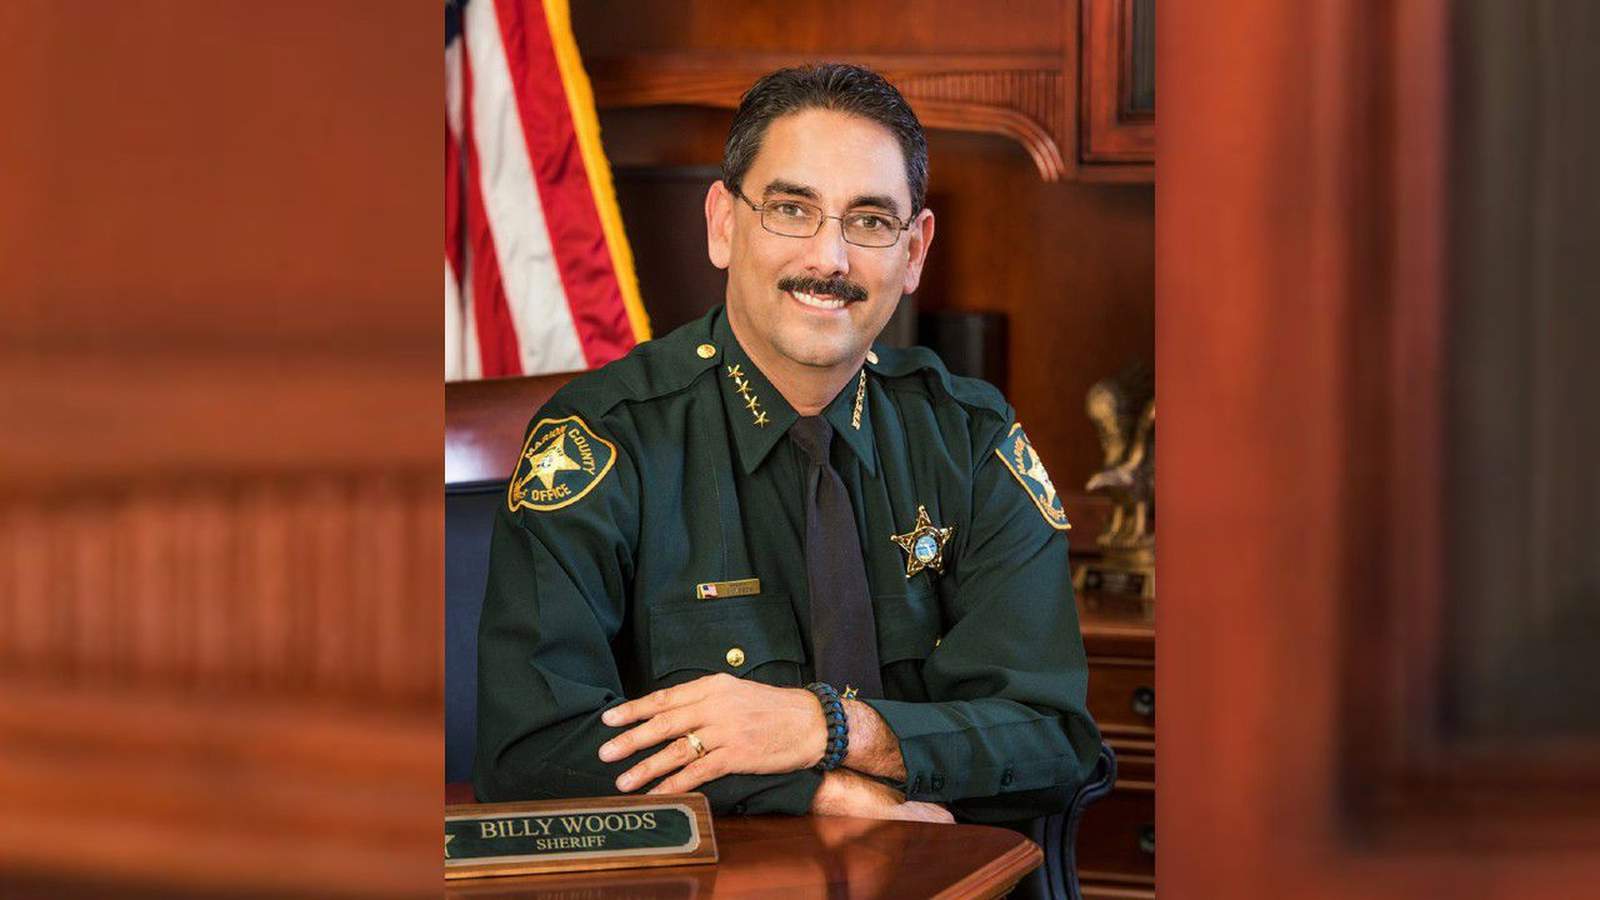 ‘I can already hear the whining:’ Florida sheriff bans masks for deputies